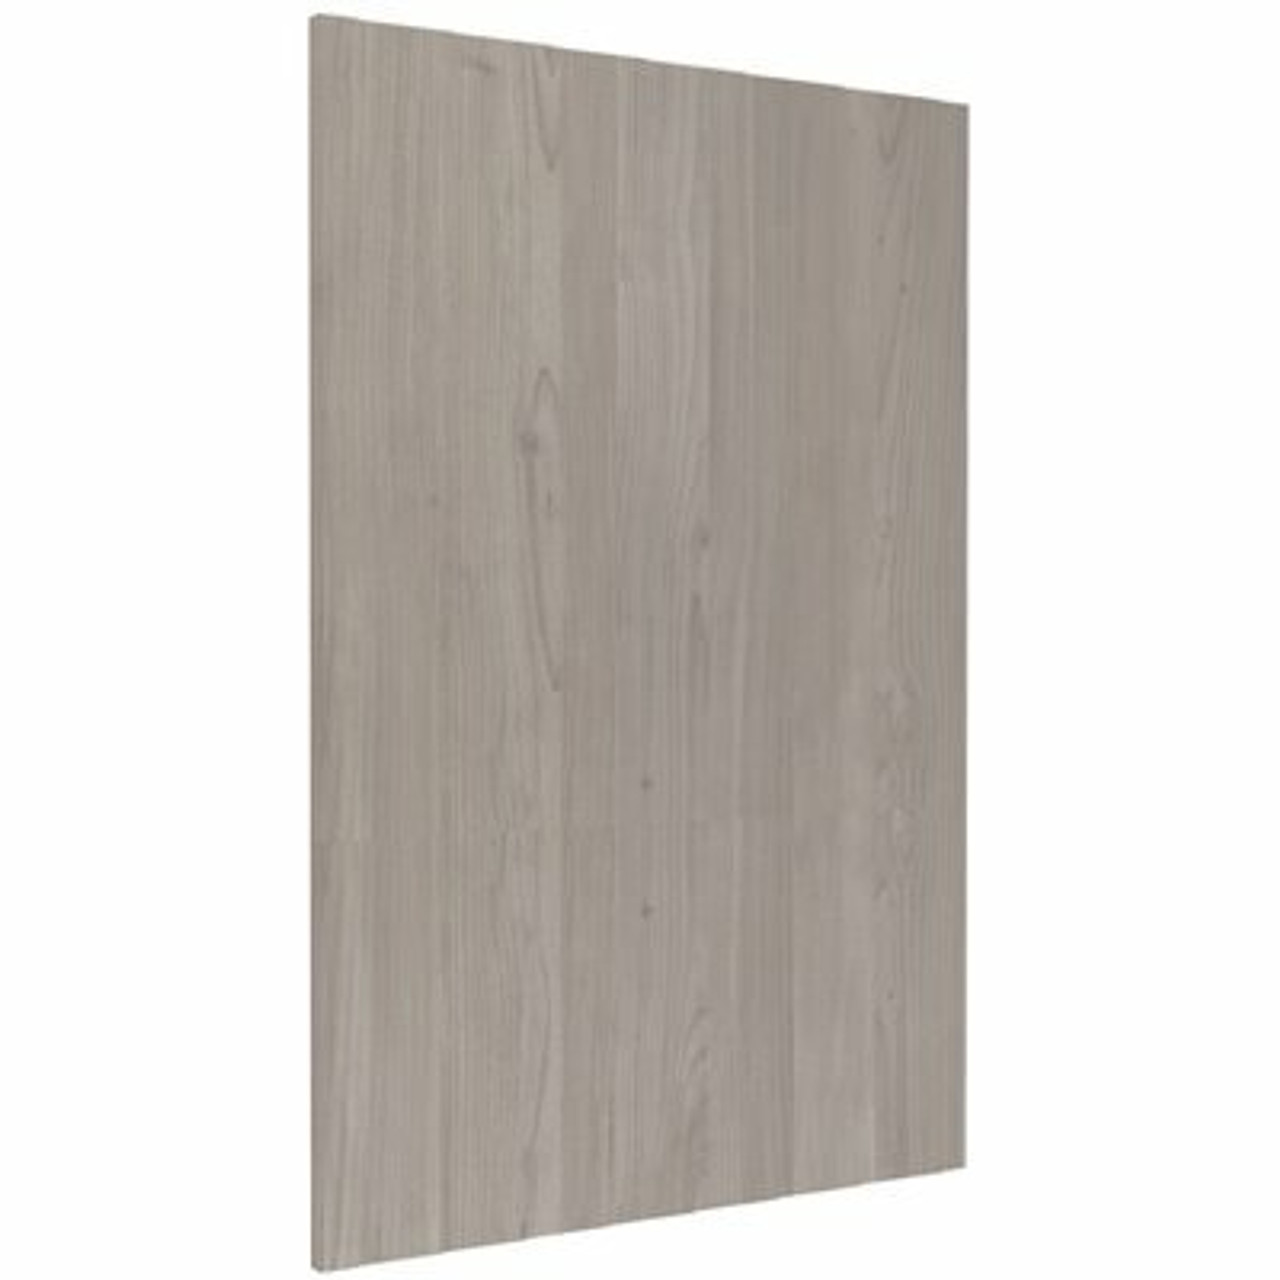 Cambridge Standard 90 In. X 24 In. X 1 In. Decorative End Panel Base Cabinet In Grey Nordic